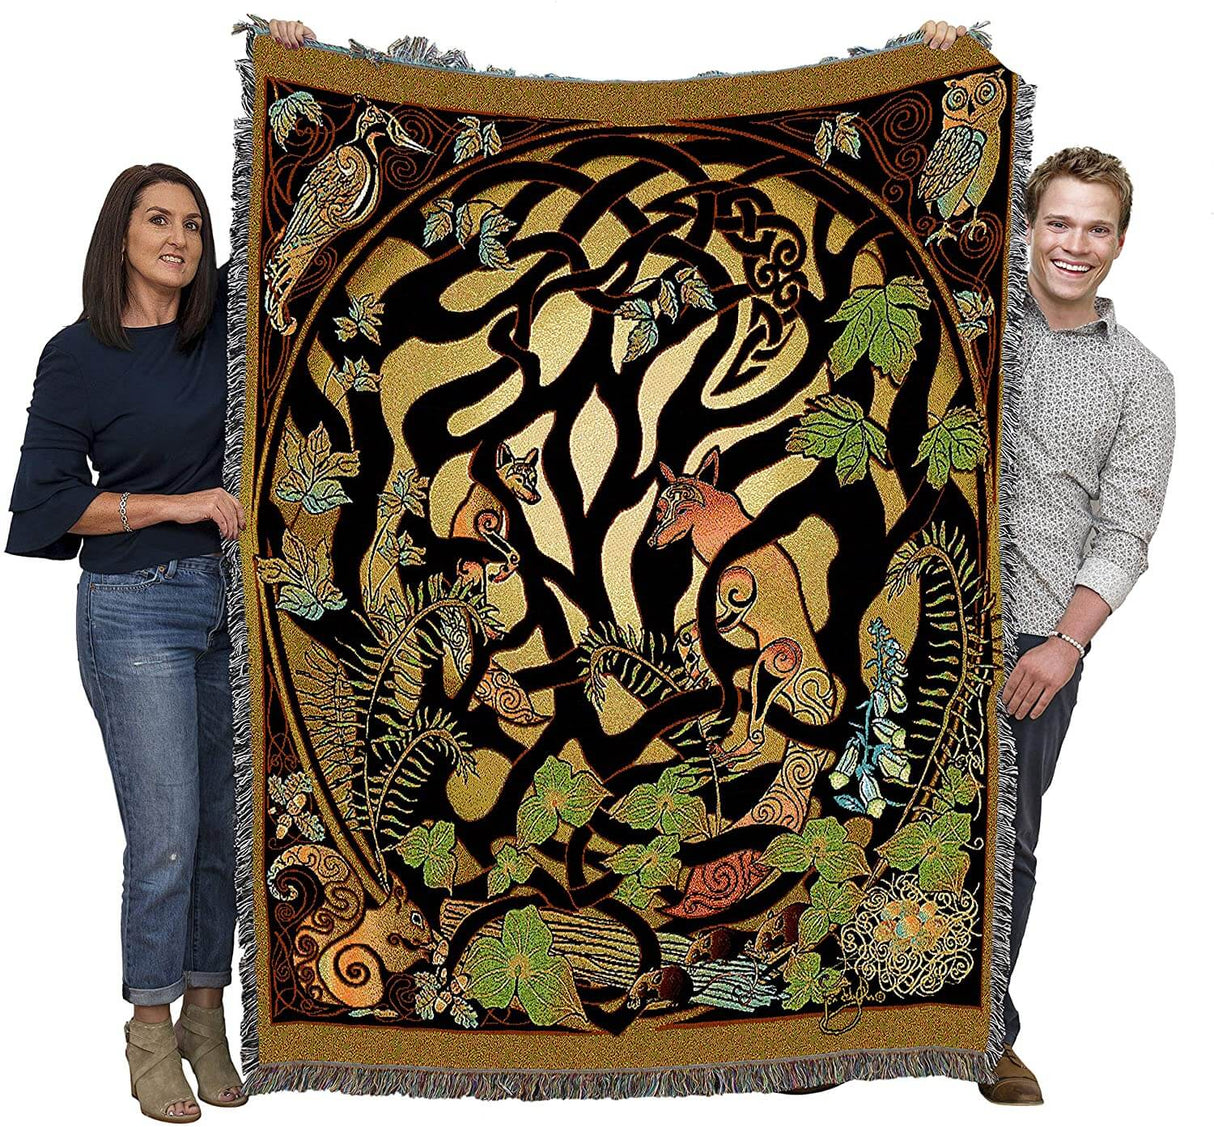 Foxes and woodland animals twine around a Celtic knotwork tree pattern on this tapestry throw blanket. Held up by two adults to show large size